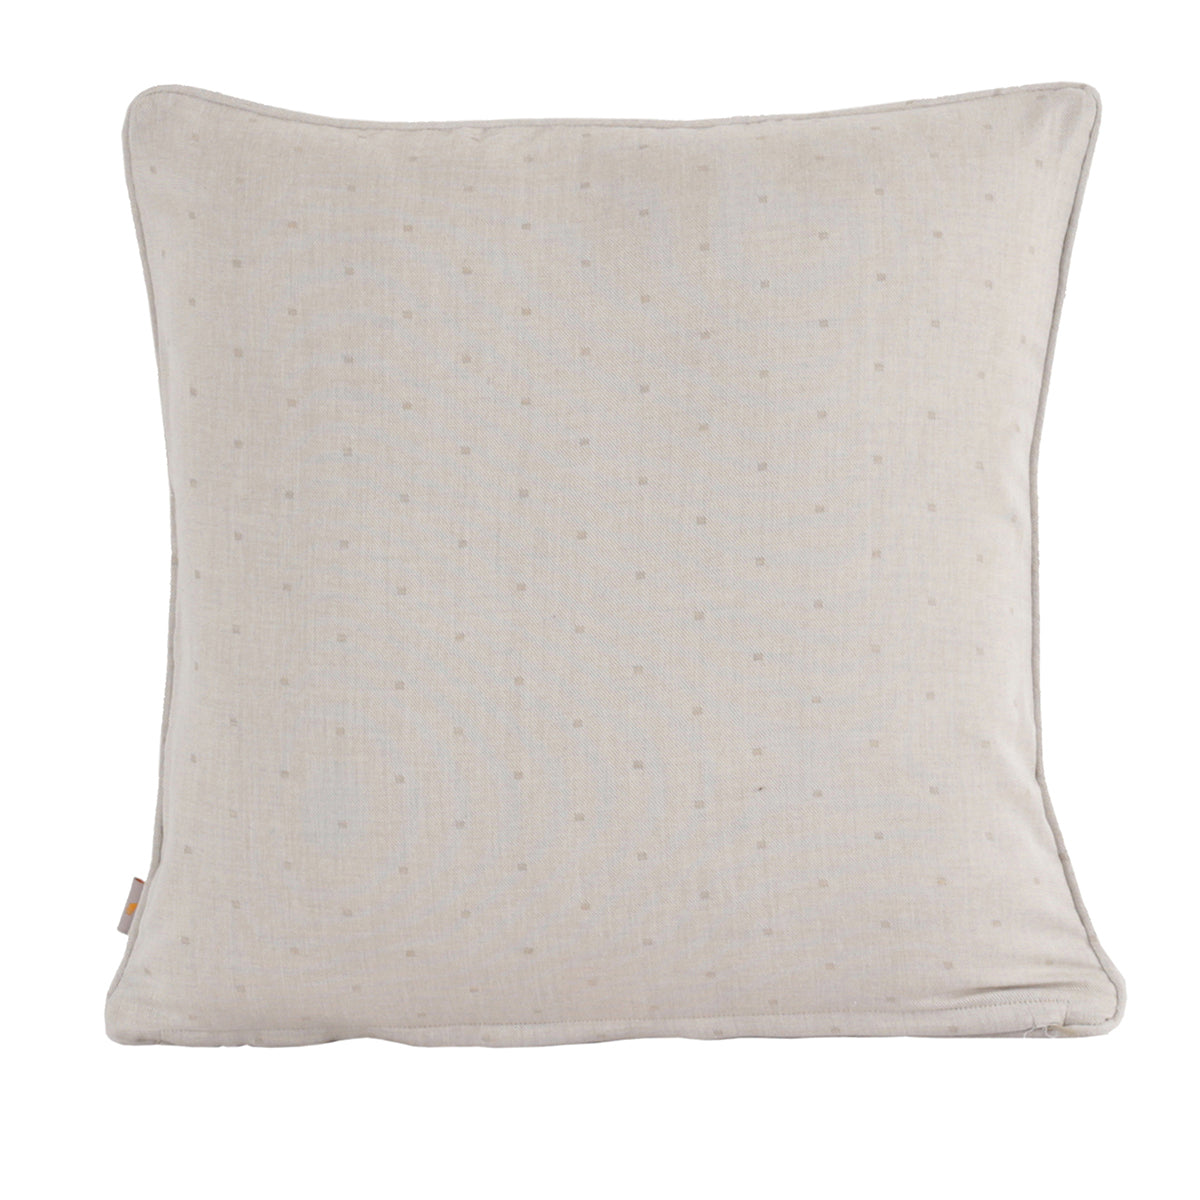 Muted Dot Made With Egyptian Cotton Hand Quilted Cushion Cover